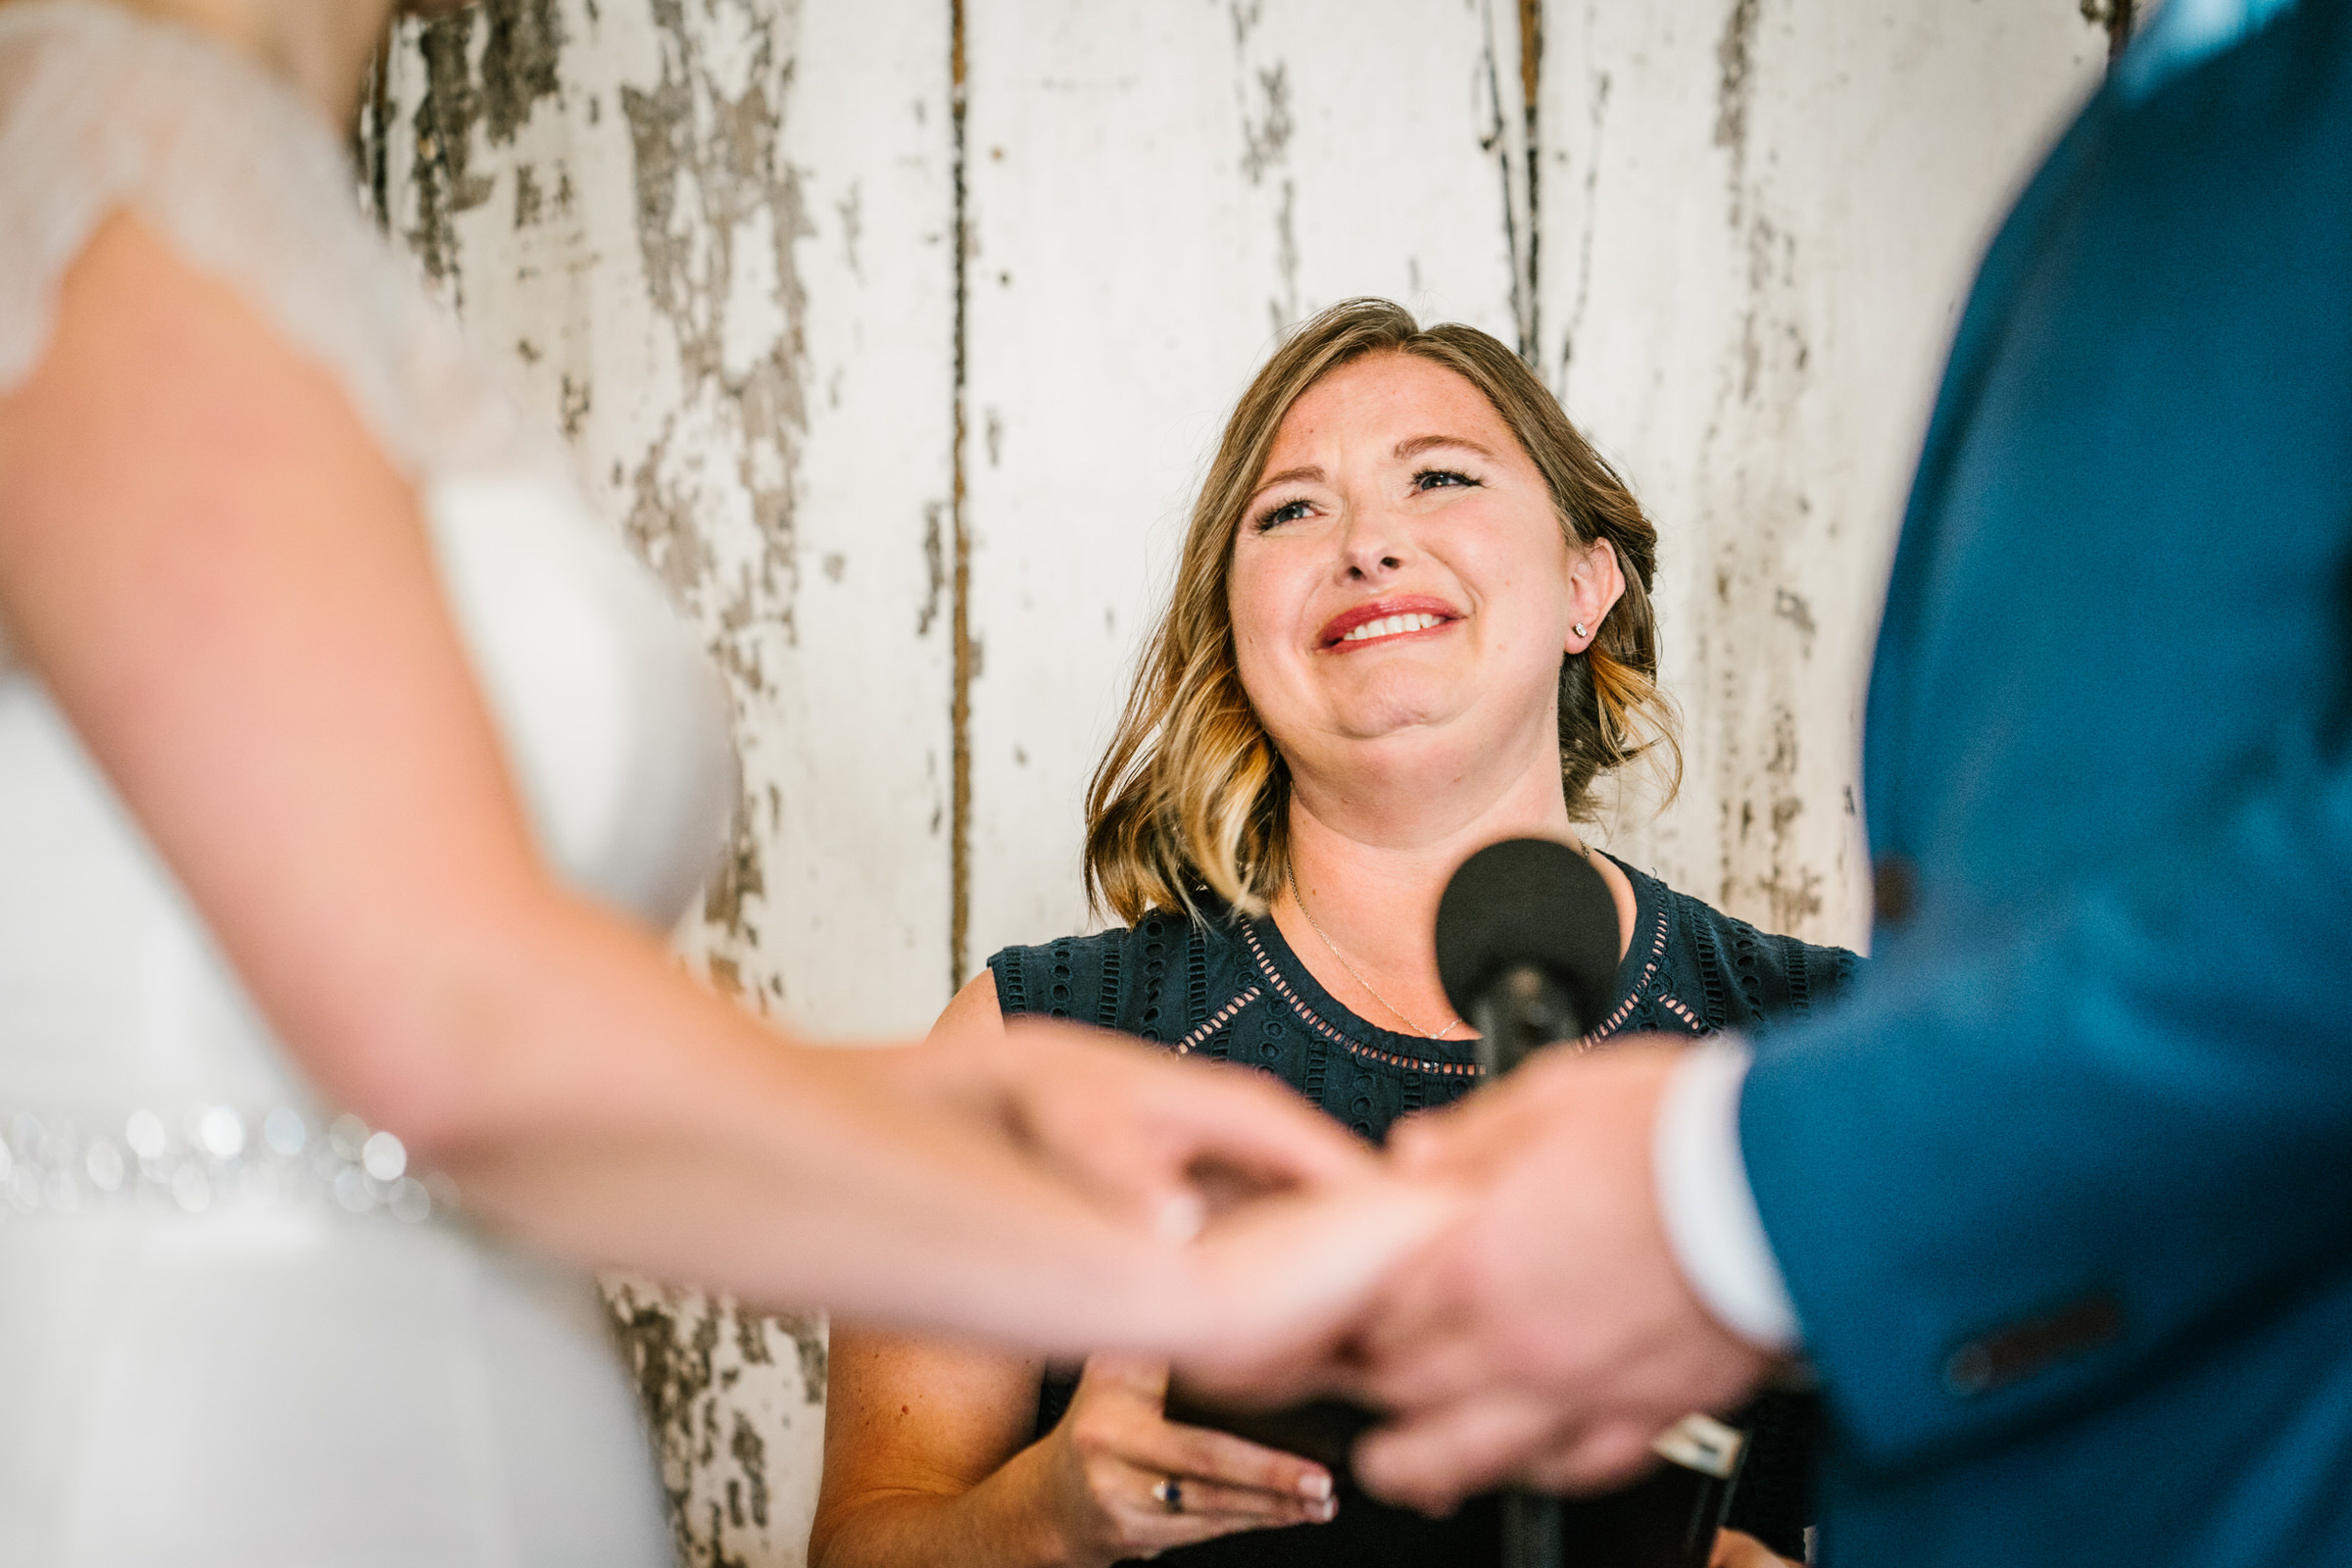 Wayfarer Whidbey Island Wedding: Sara's sister-in-law tears up as she officiates their wedding